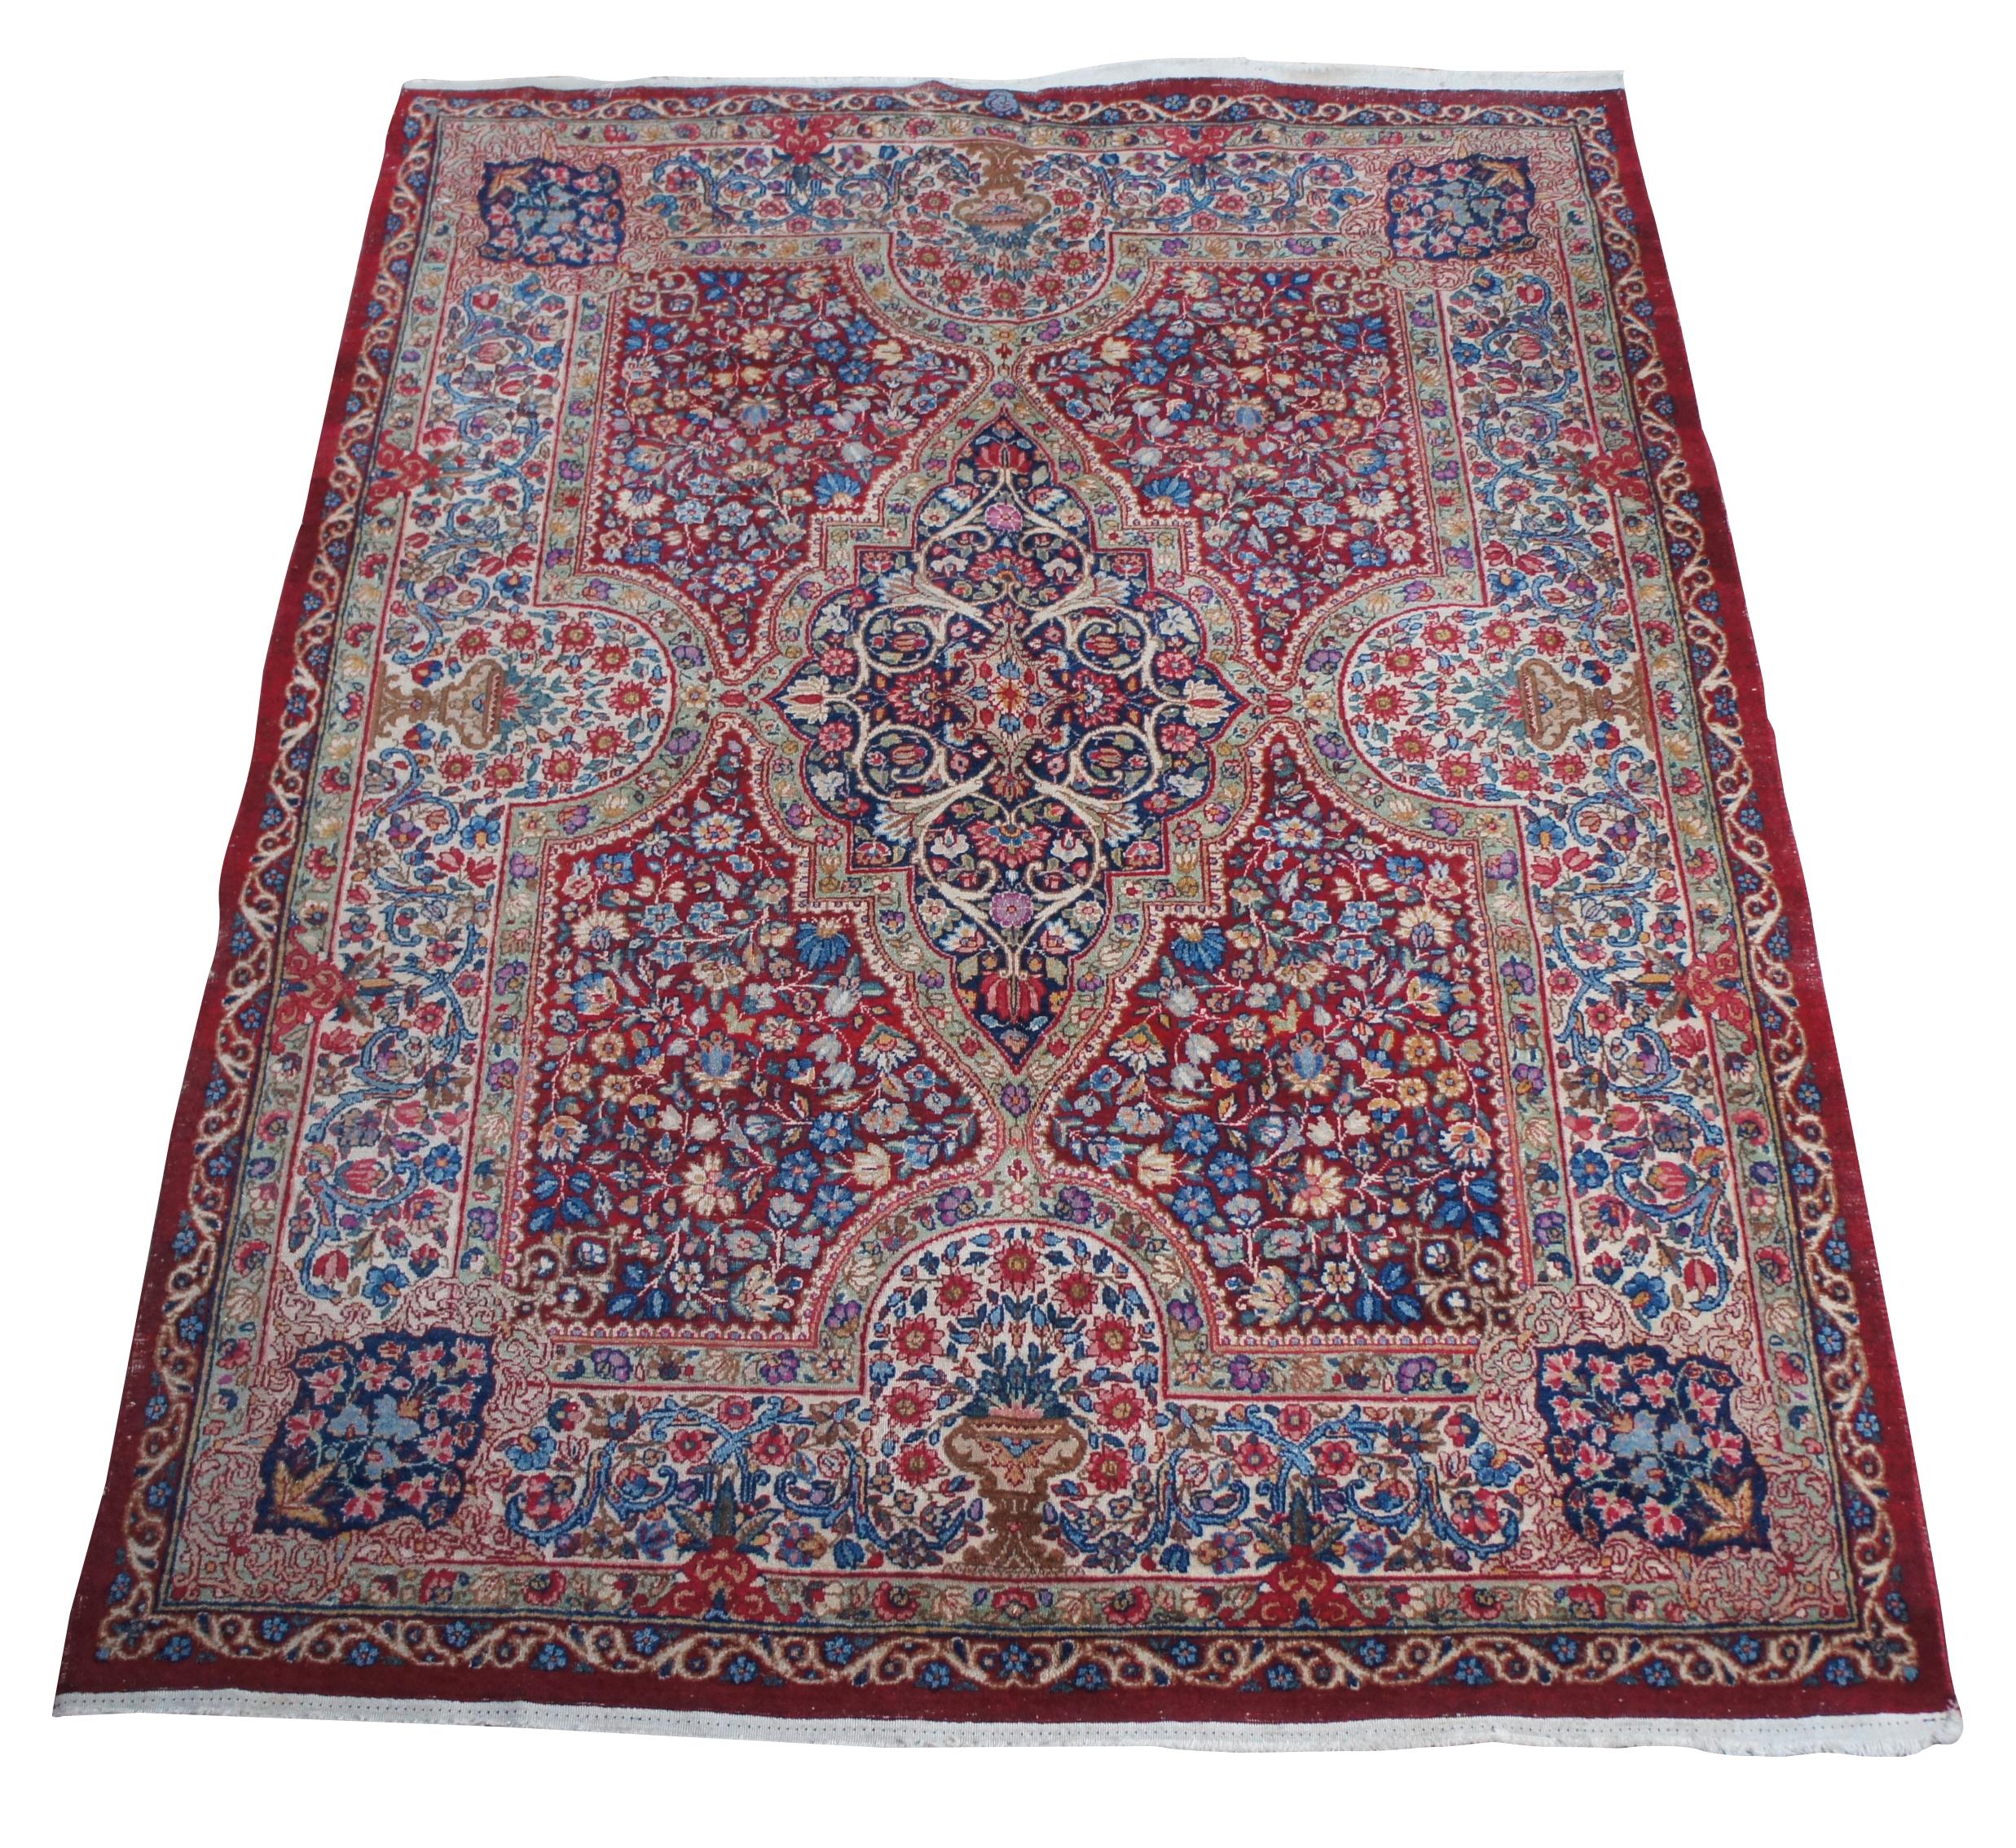 An amazing handmade Kerman area rug made in SE Persian, circa 1940-50s. Features a red base with a colorful geometric field of flowers. Includes a bouquet along each straight flanked by pendeloques along the corners. The color combinations combined